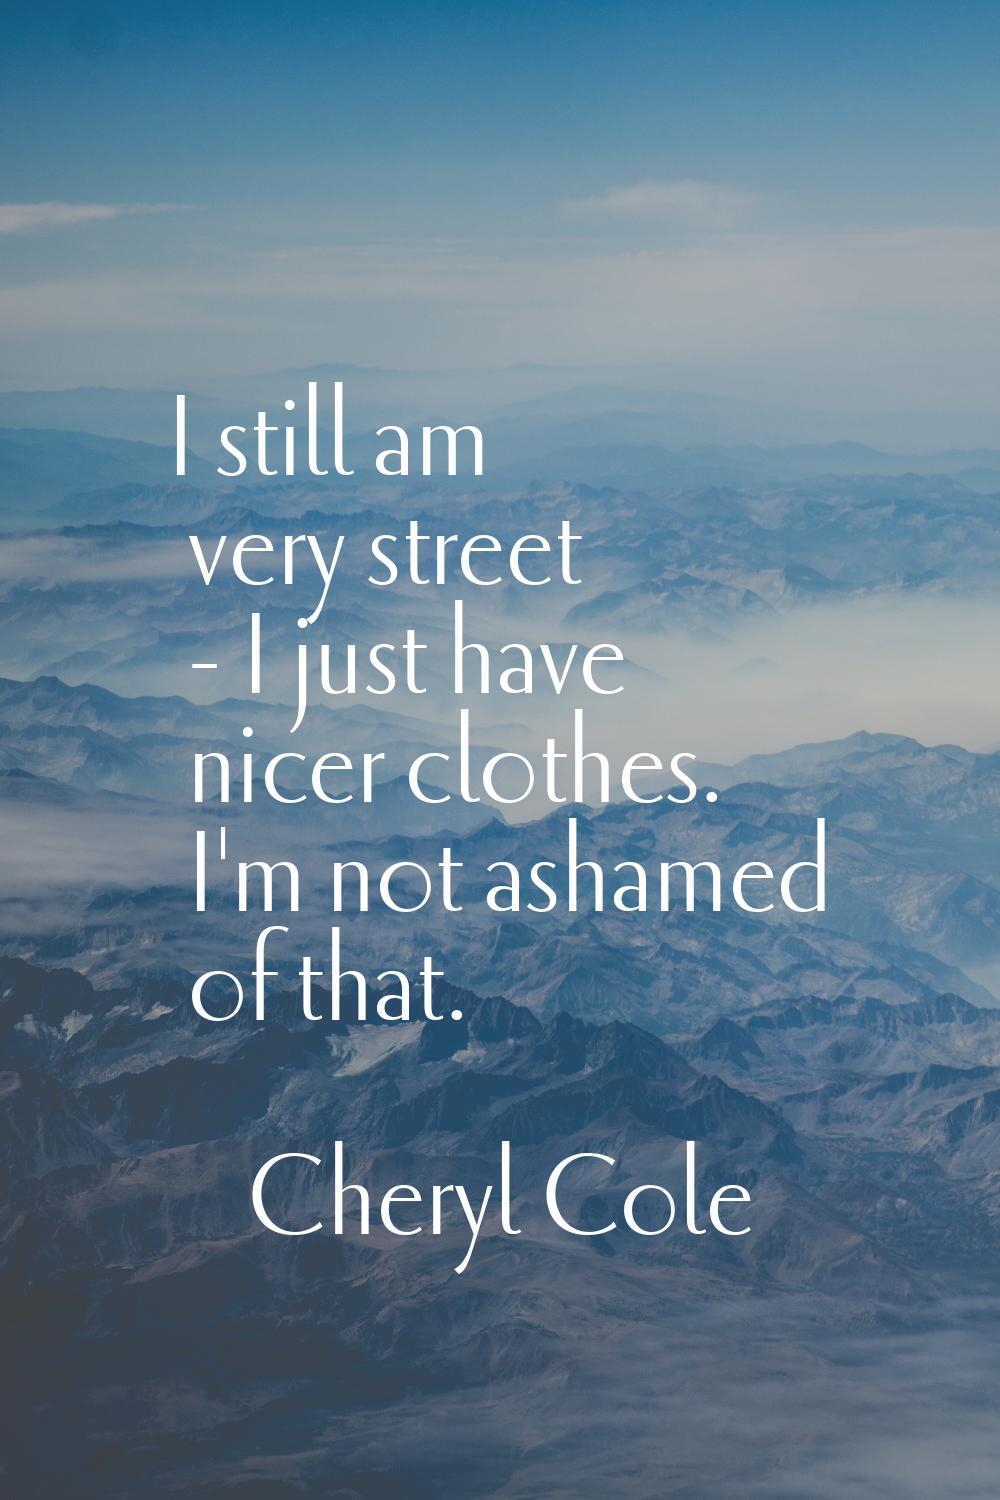 I still am very street - I just have nicer clothes. I'm not ashamed of that.